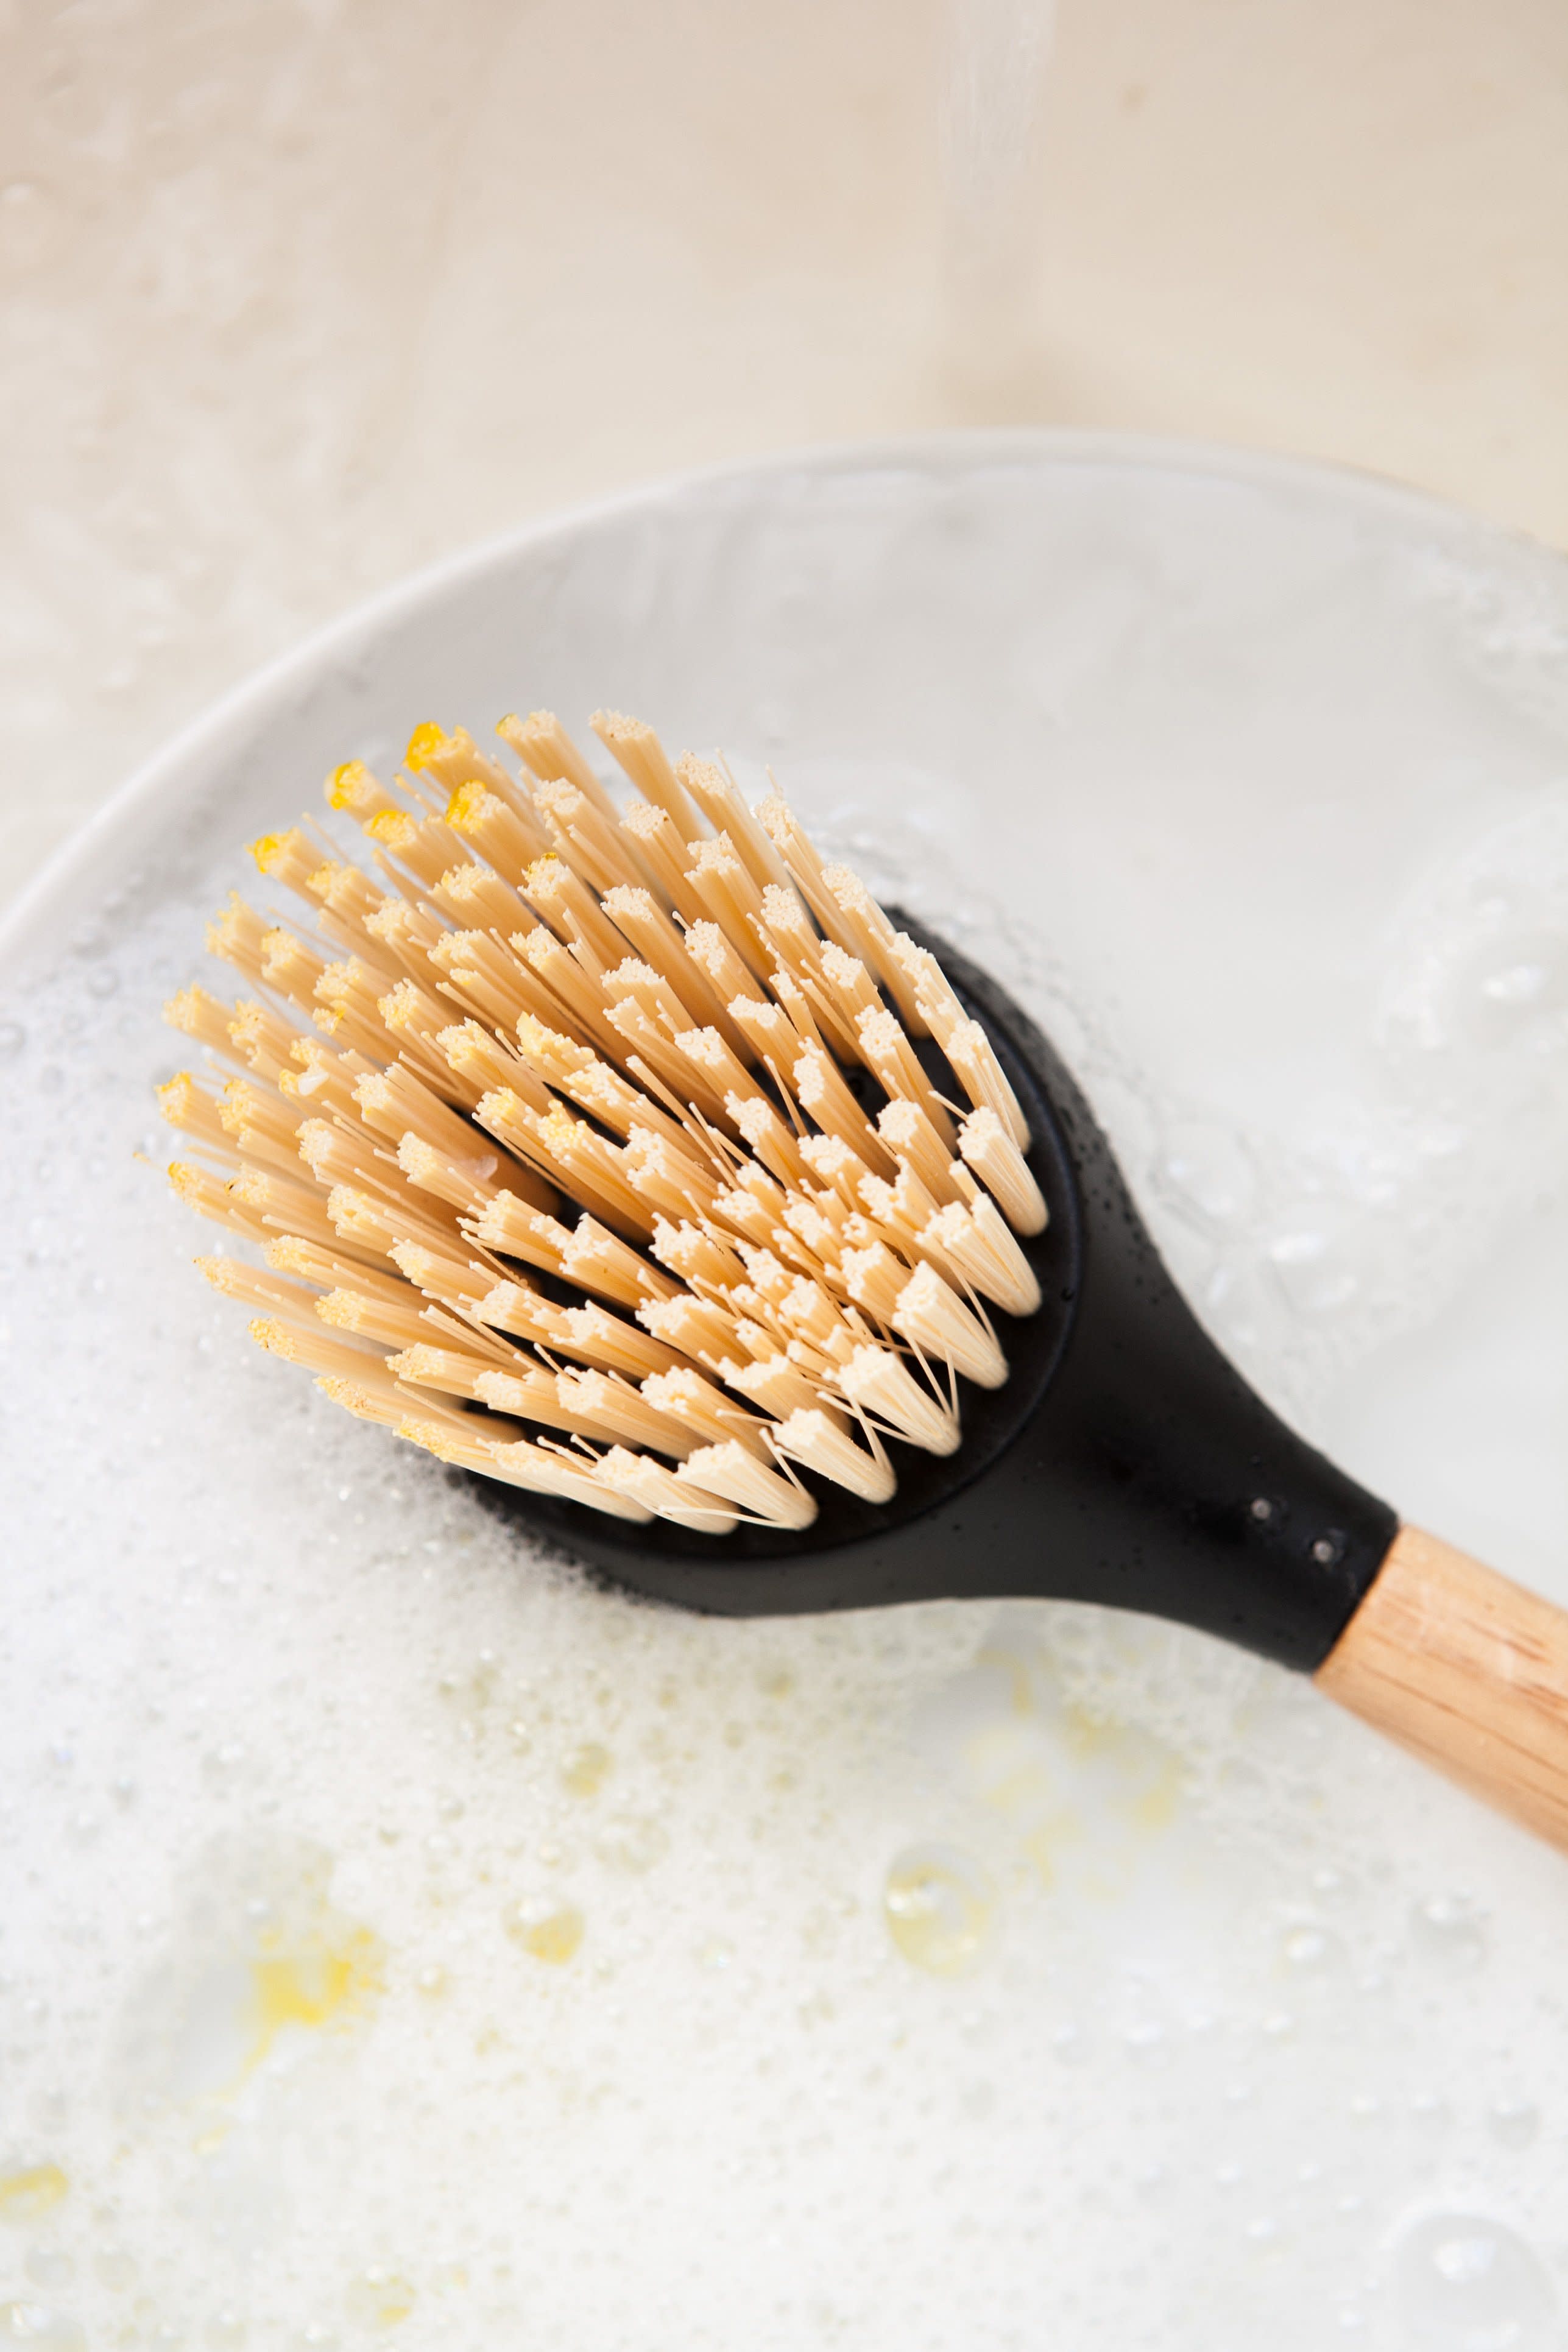 How To Clean and Disinfect a Dish Brush